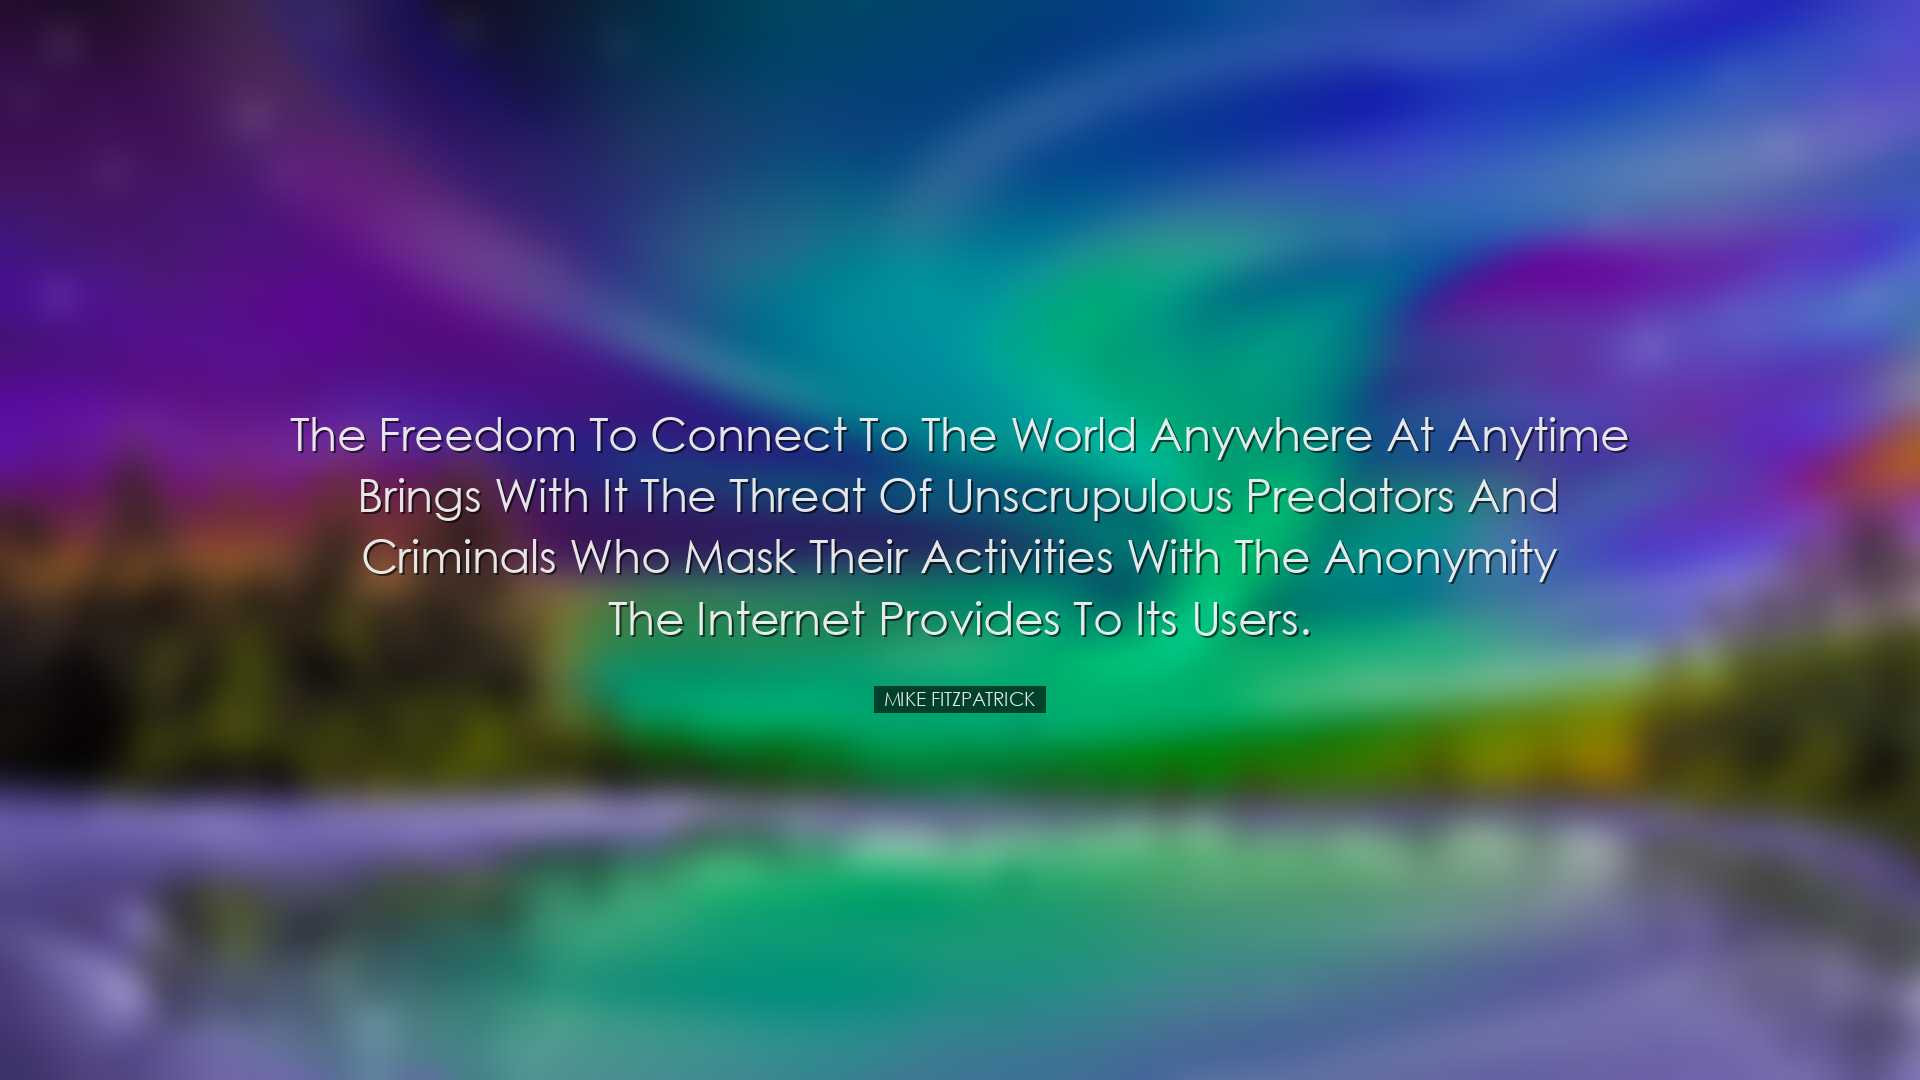 The freedom to connect to the world anywhere at anytime brings wit